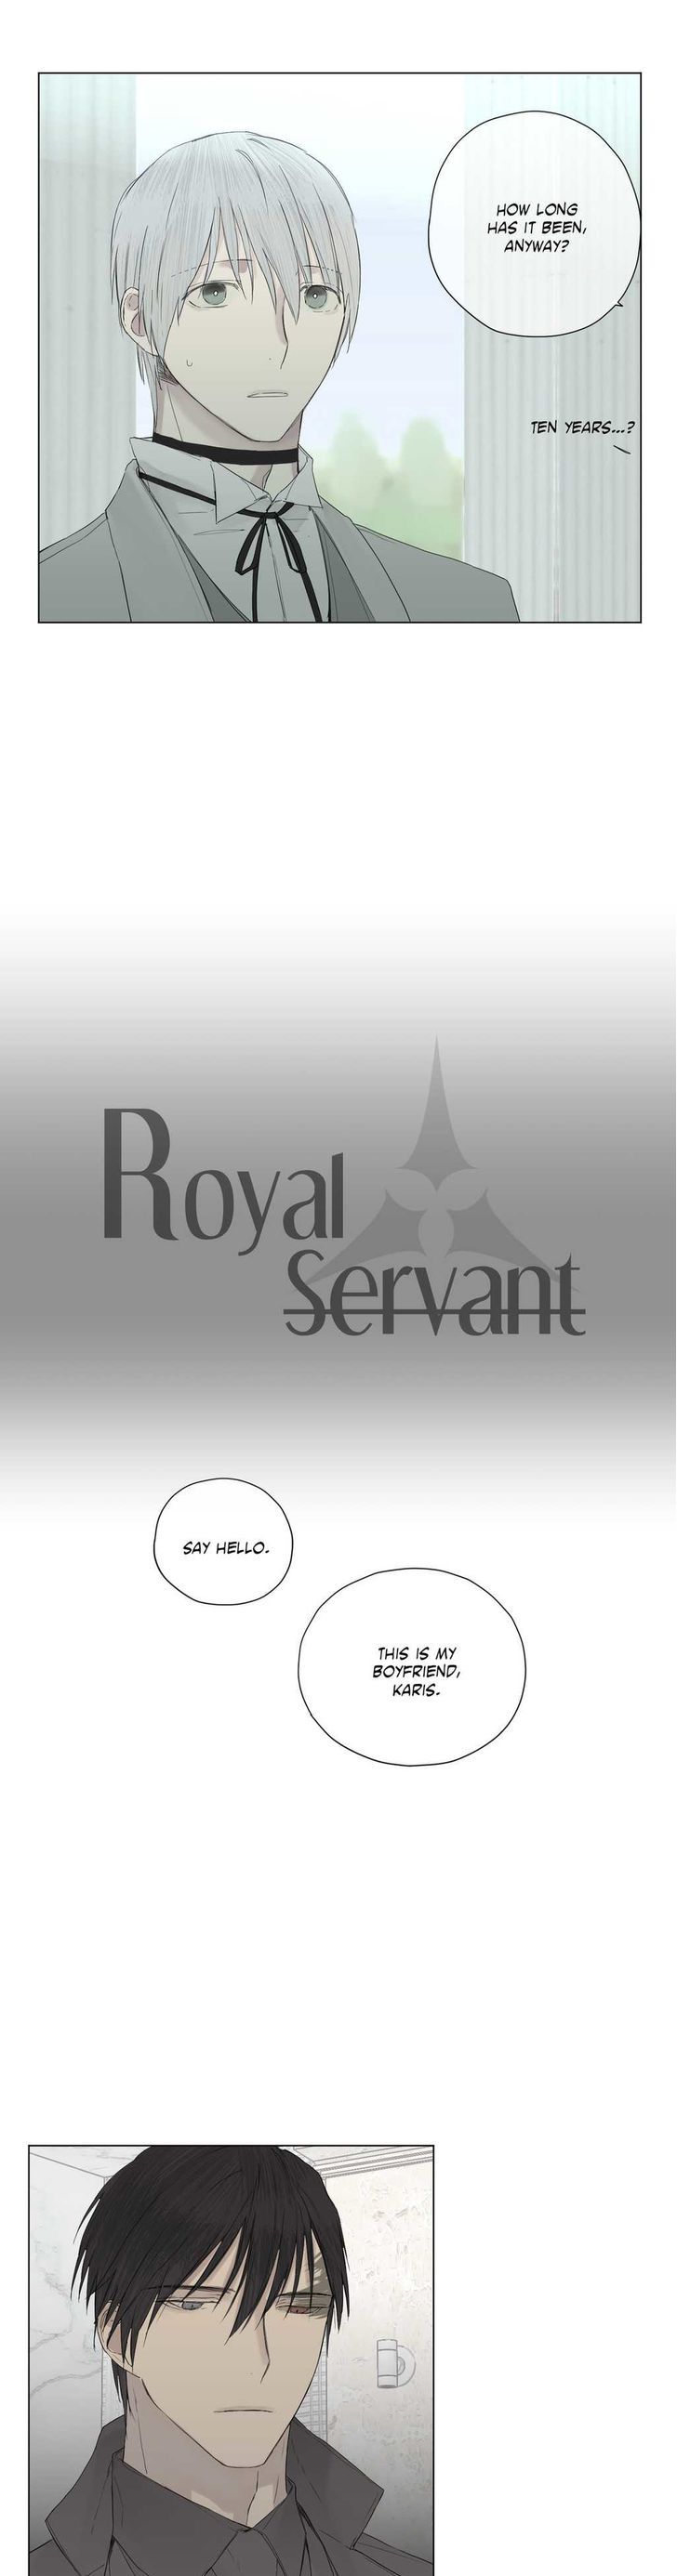 Royal Servant - Chapter 9 Page 13